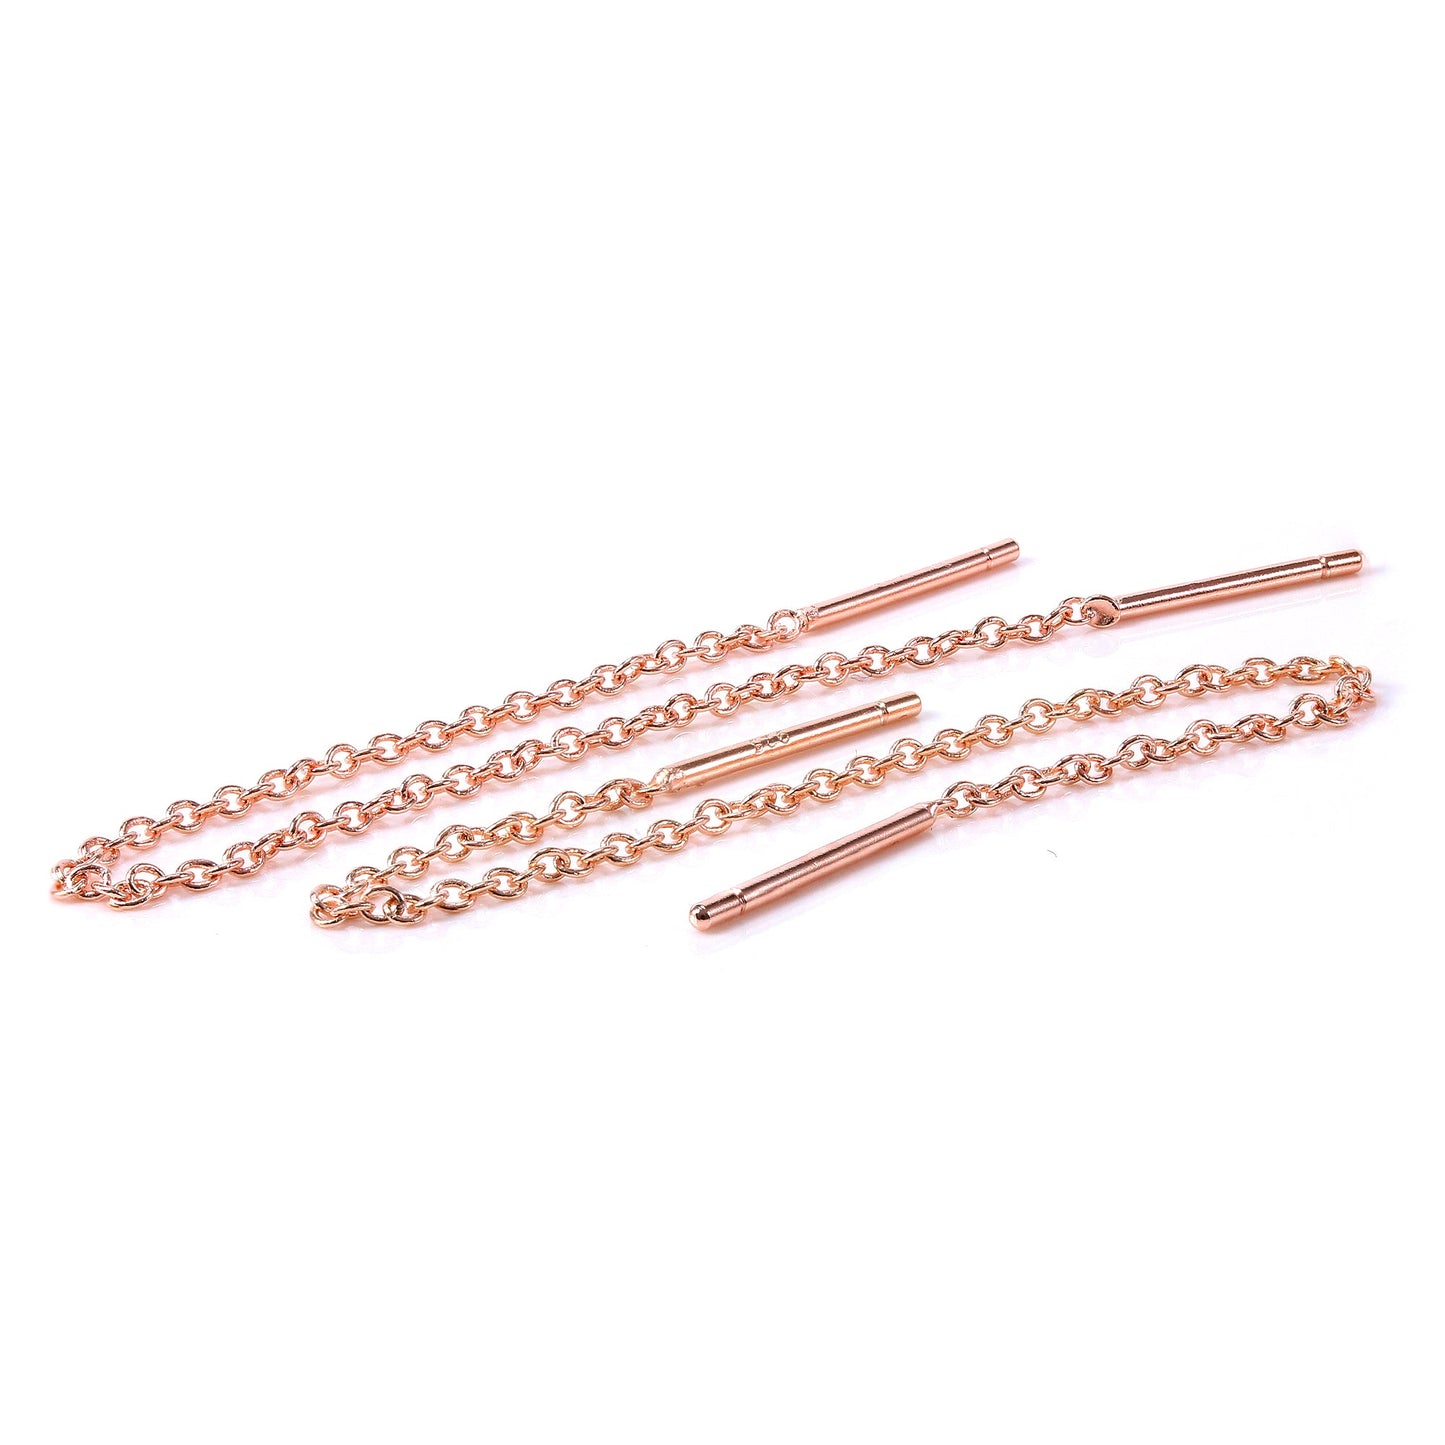 Rose Gold Plated Sterling Silver 12mm Bar Threader Pull Through Earrings